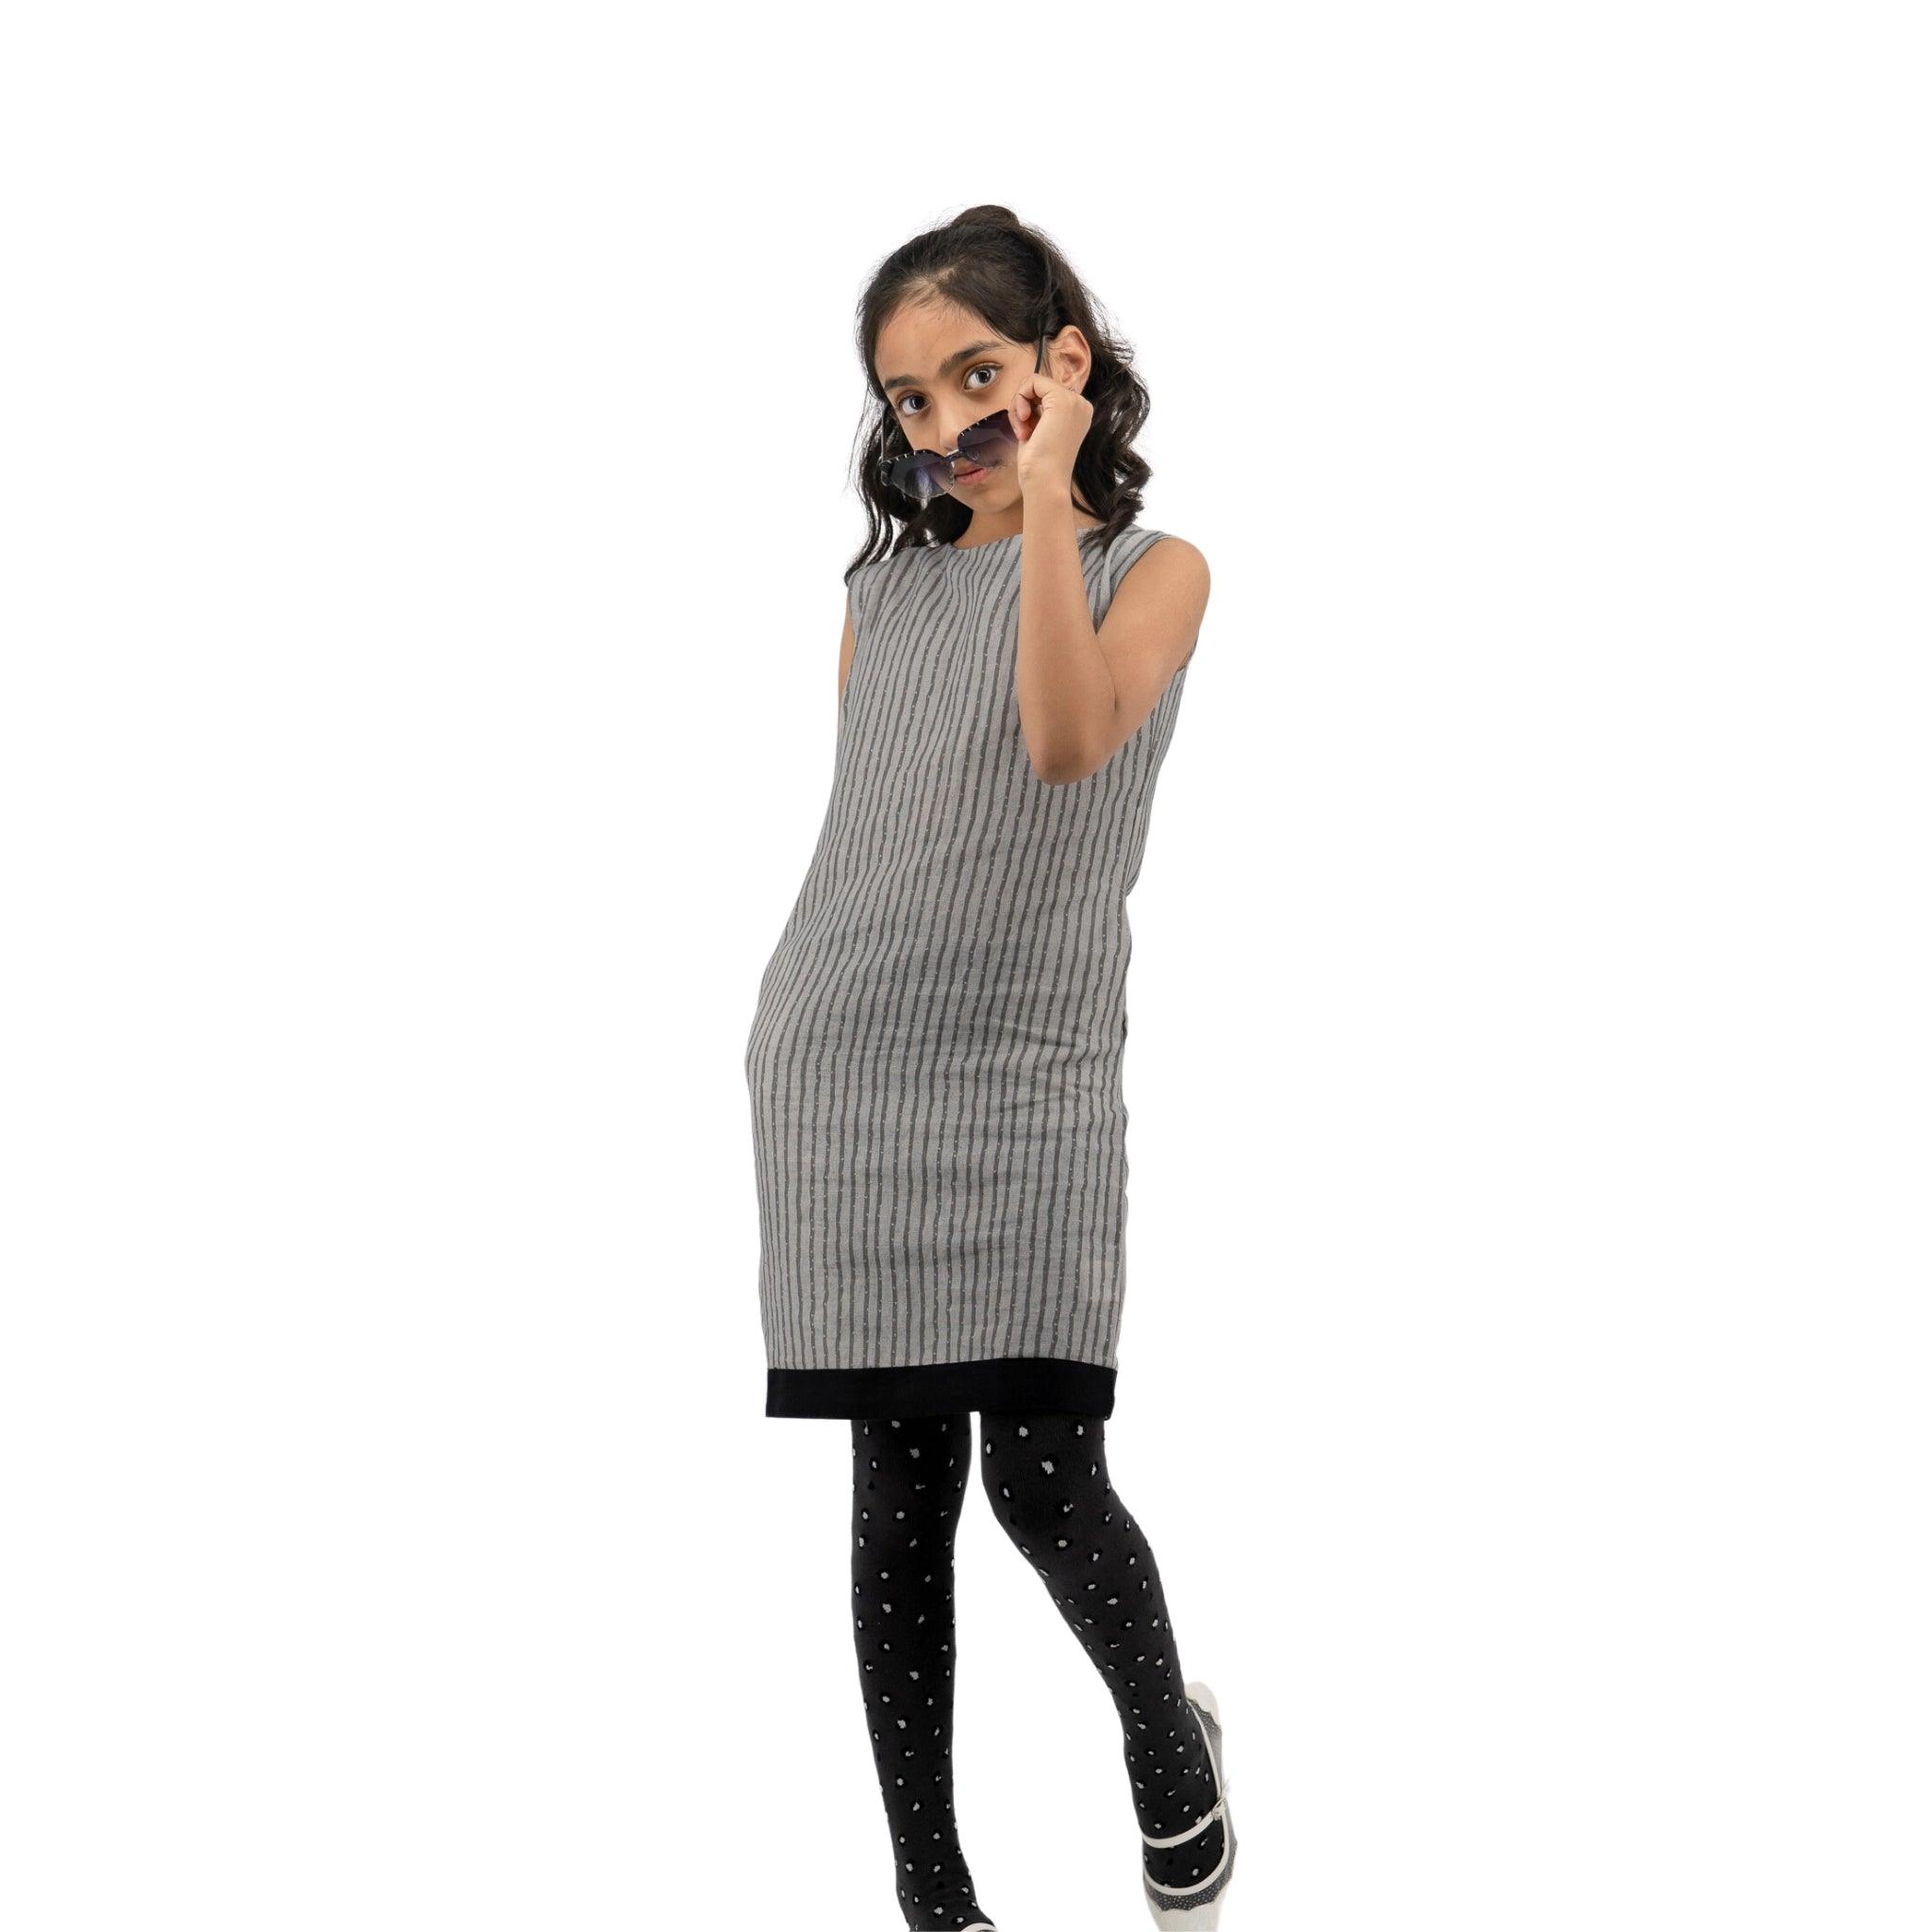 A young girl in a Karee Linen Cotton Round Neck Frock for Kids in Steel Grey and polka-dot tights gestures a phone call with her hand, standing on a white background.